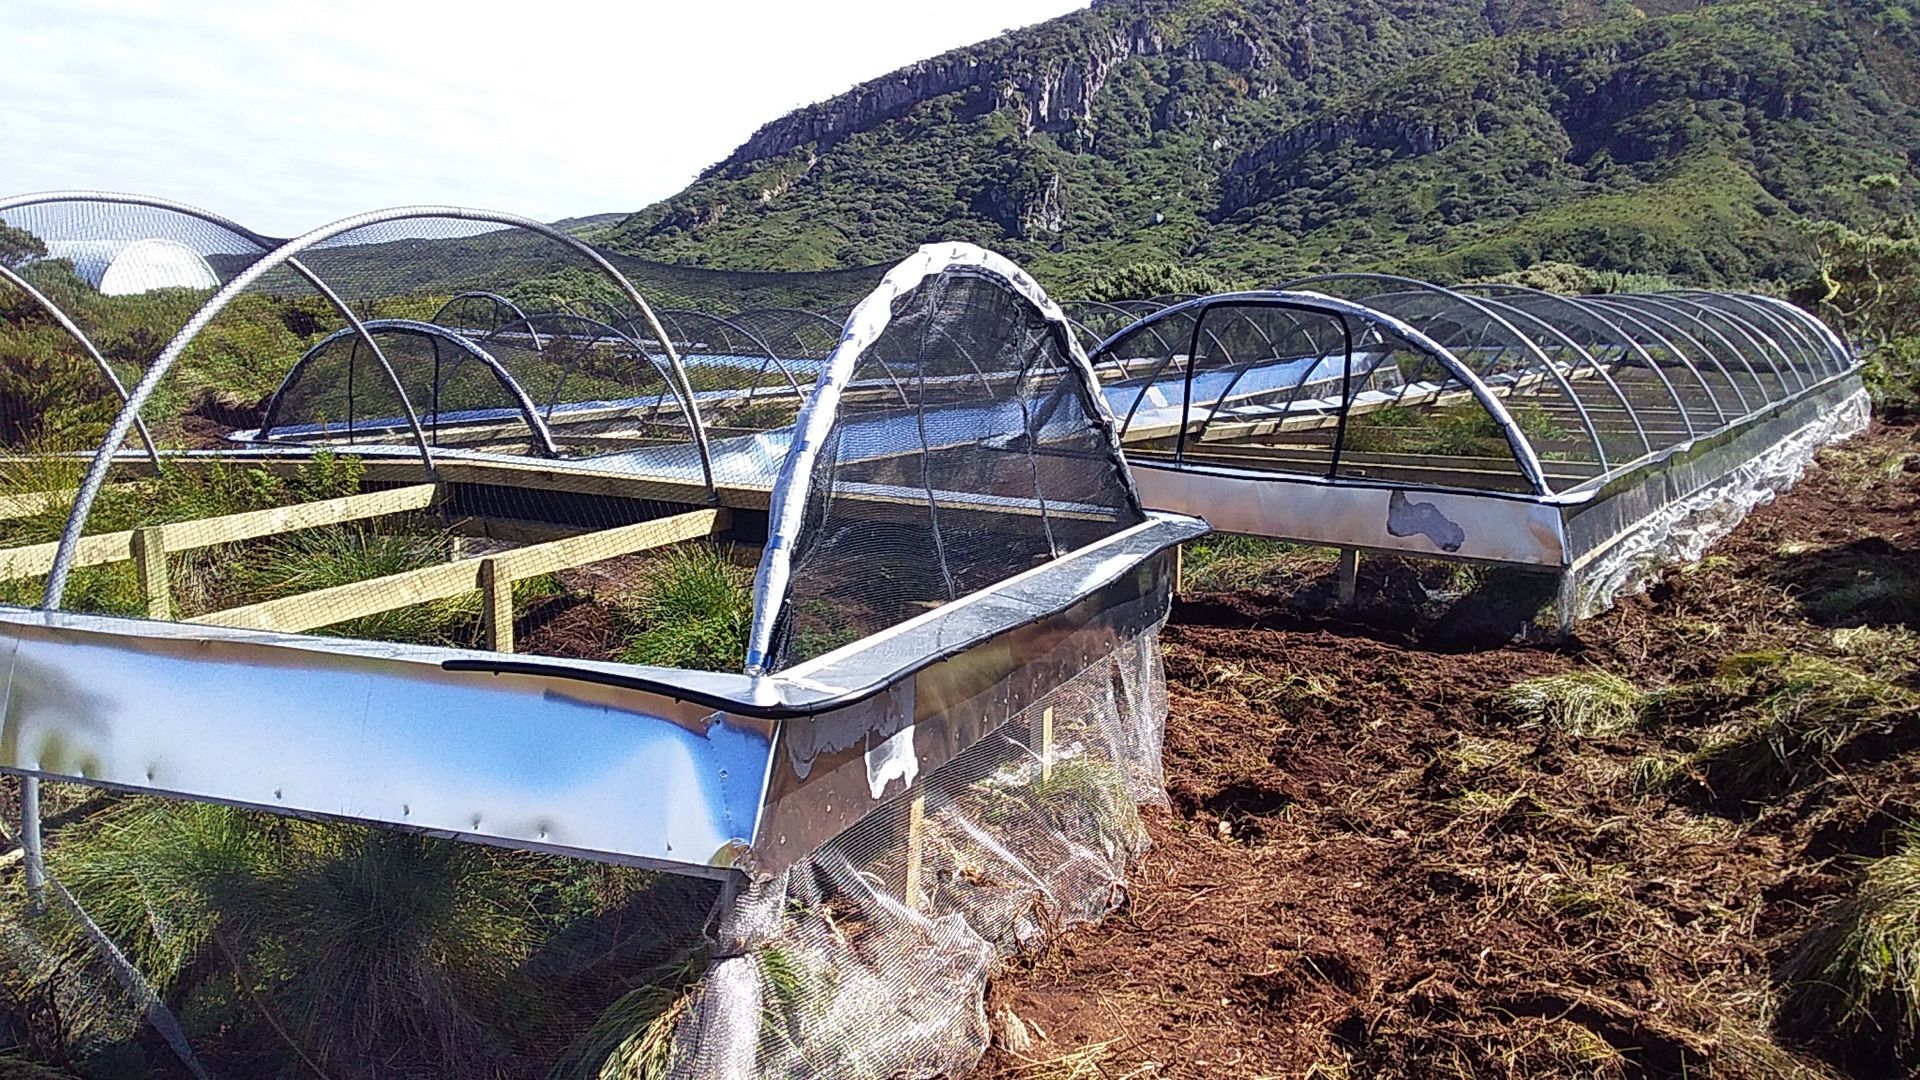 Polytunnel aviary structure on Gough Island